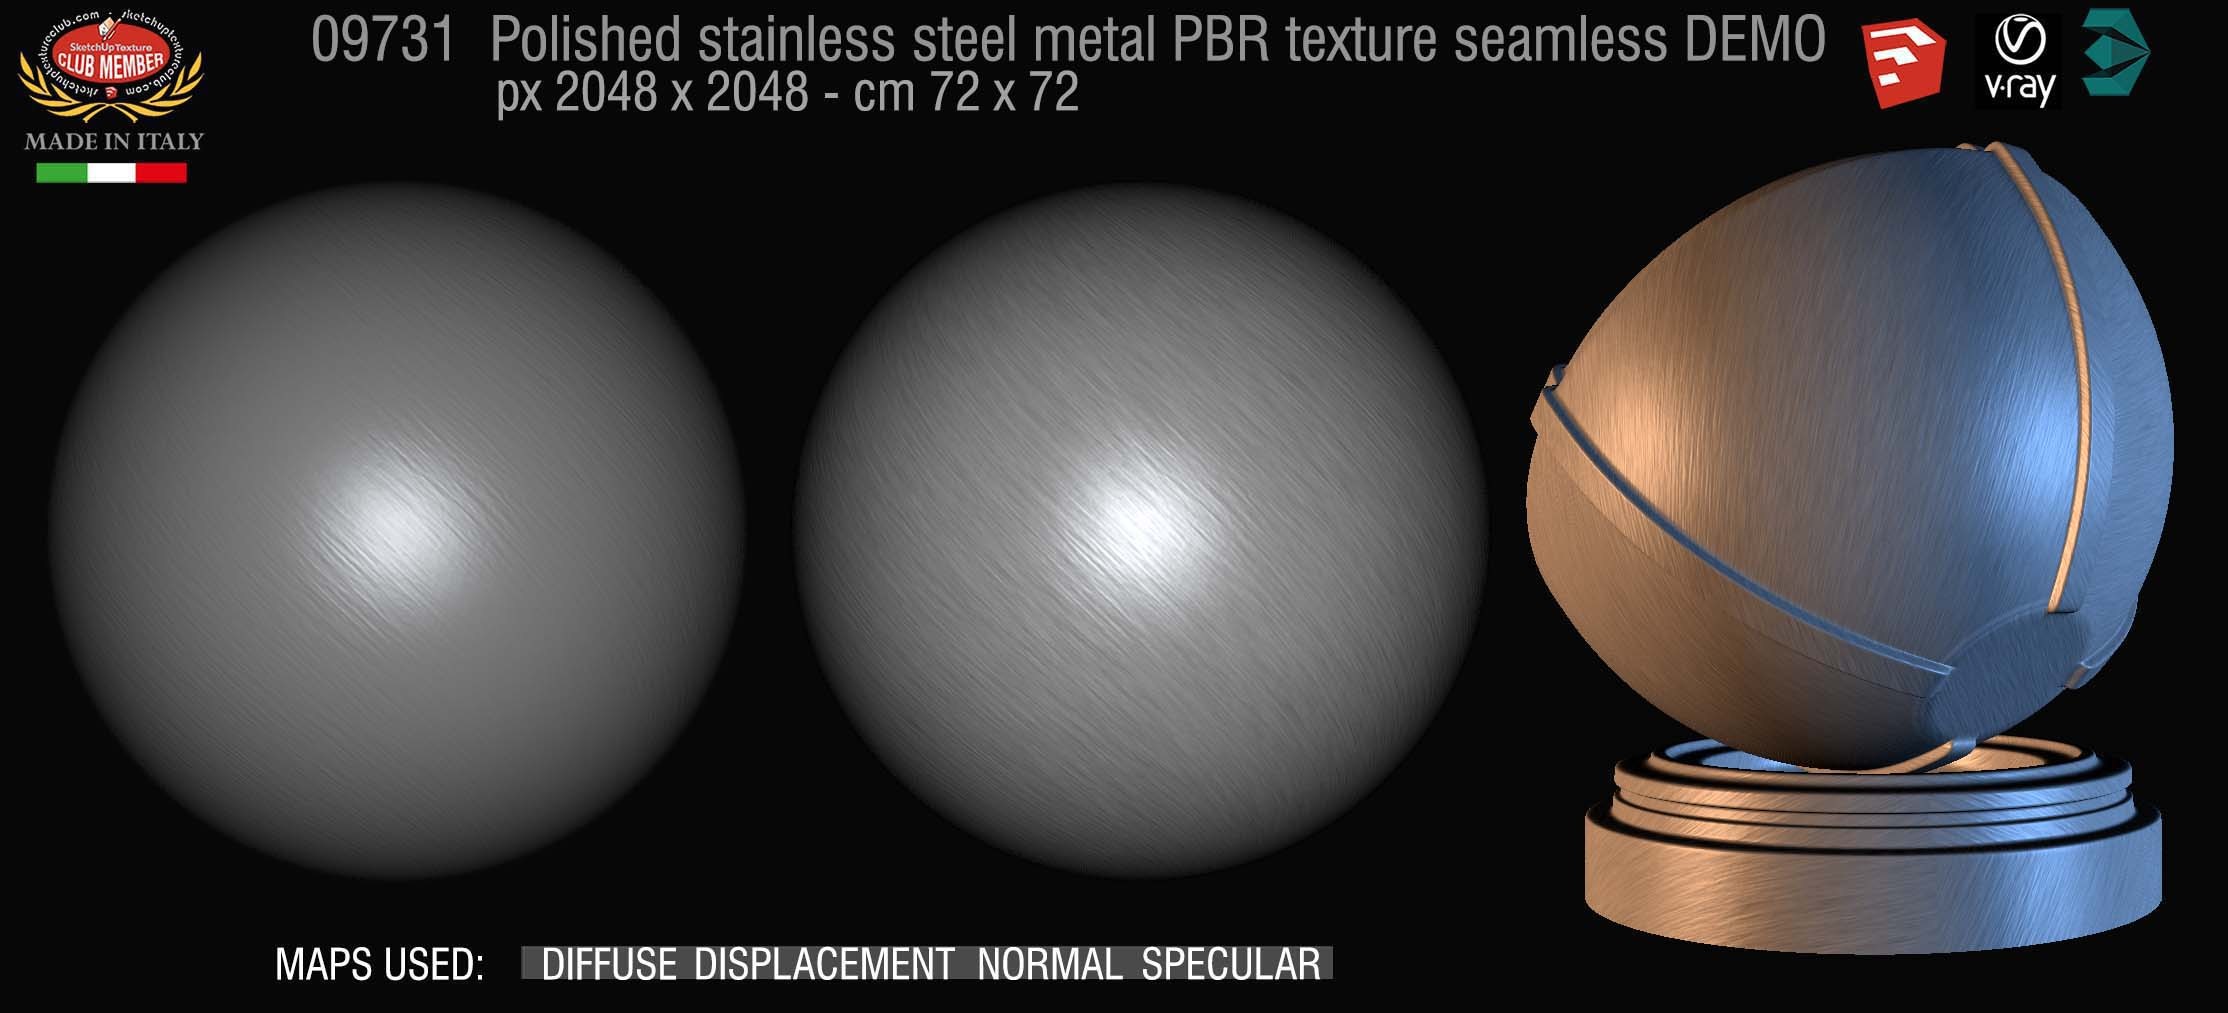 09731 Polished stainless steel metal PBR texture seamless DEMO